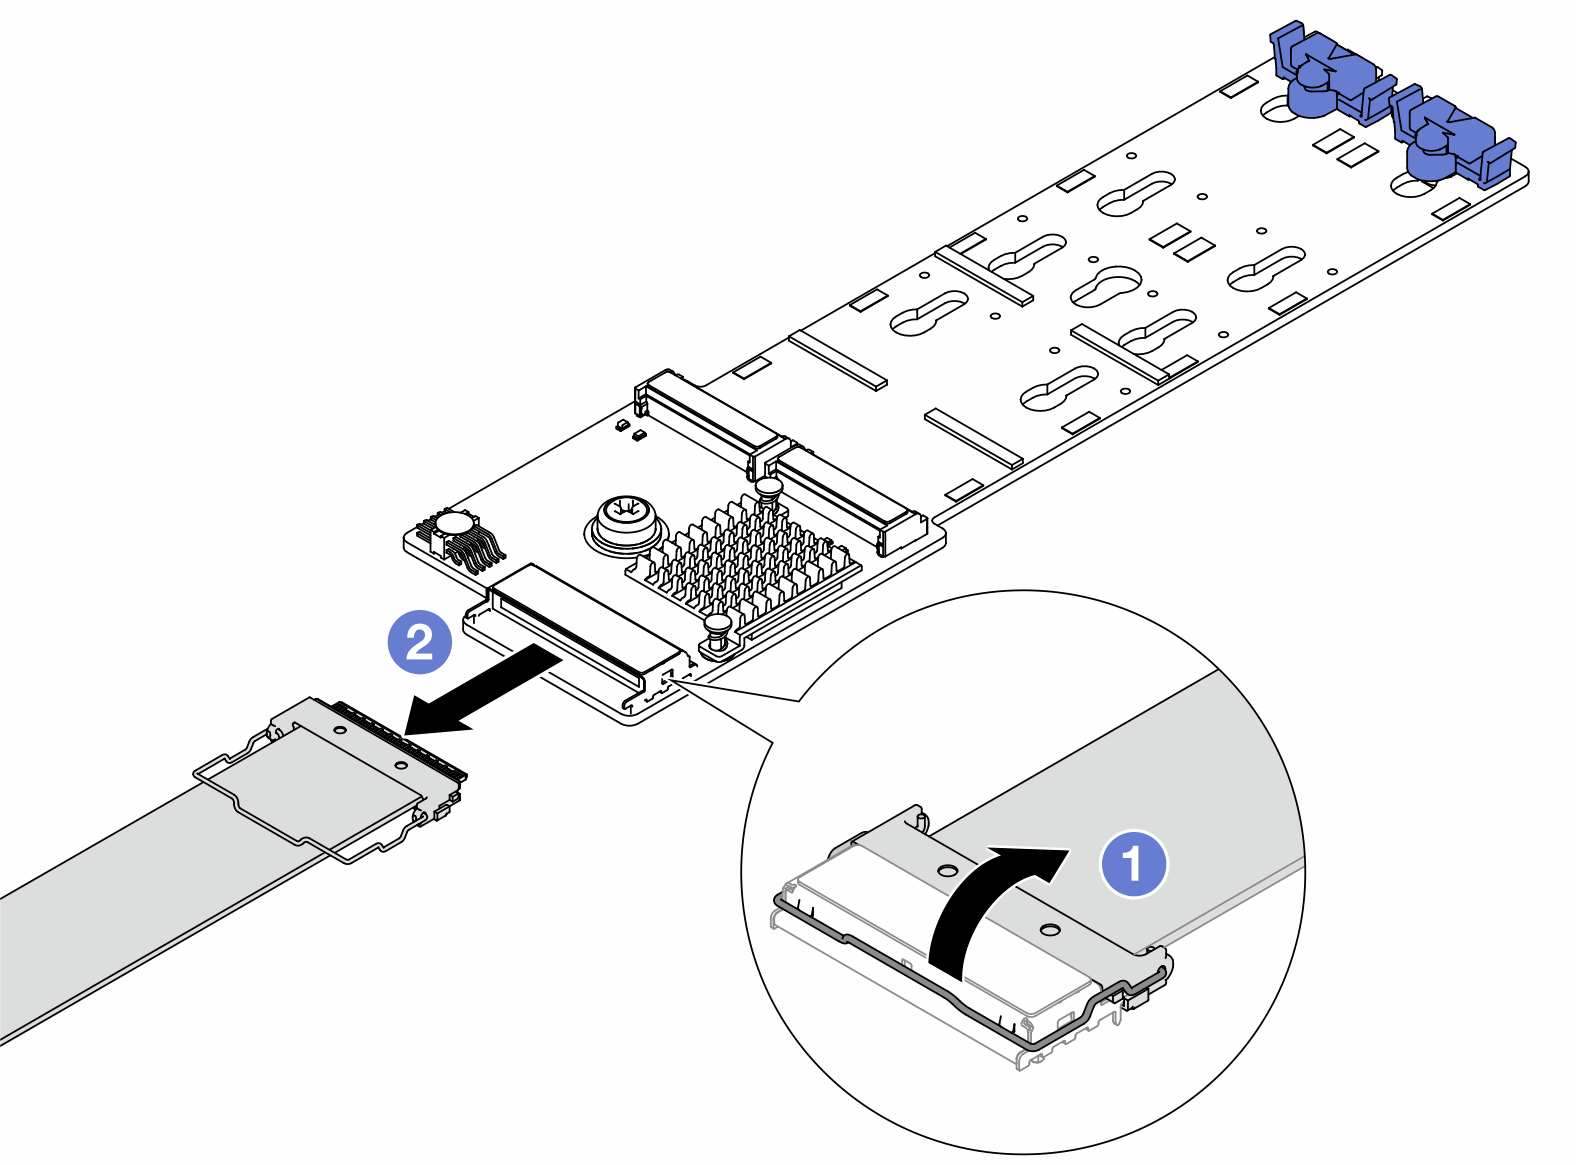 Disconnecting M.2 cables from M.2 backplane